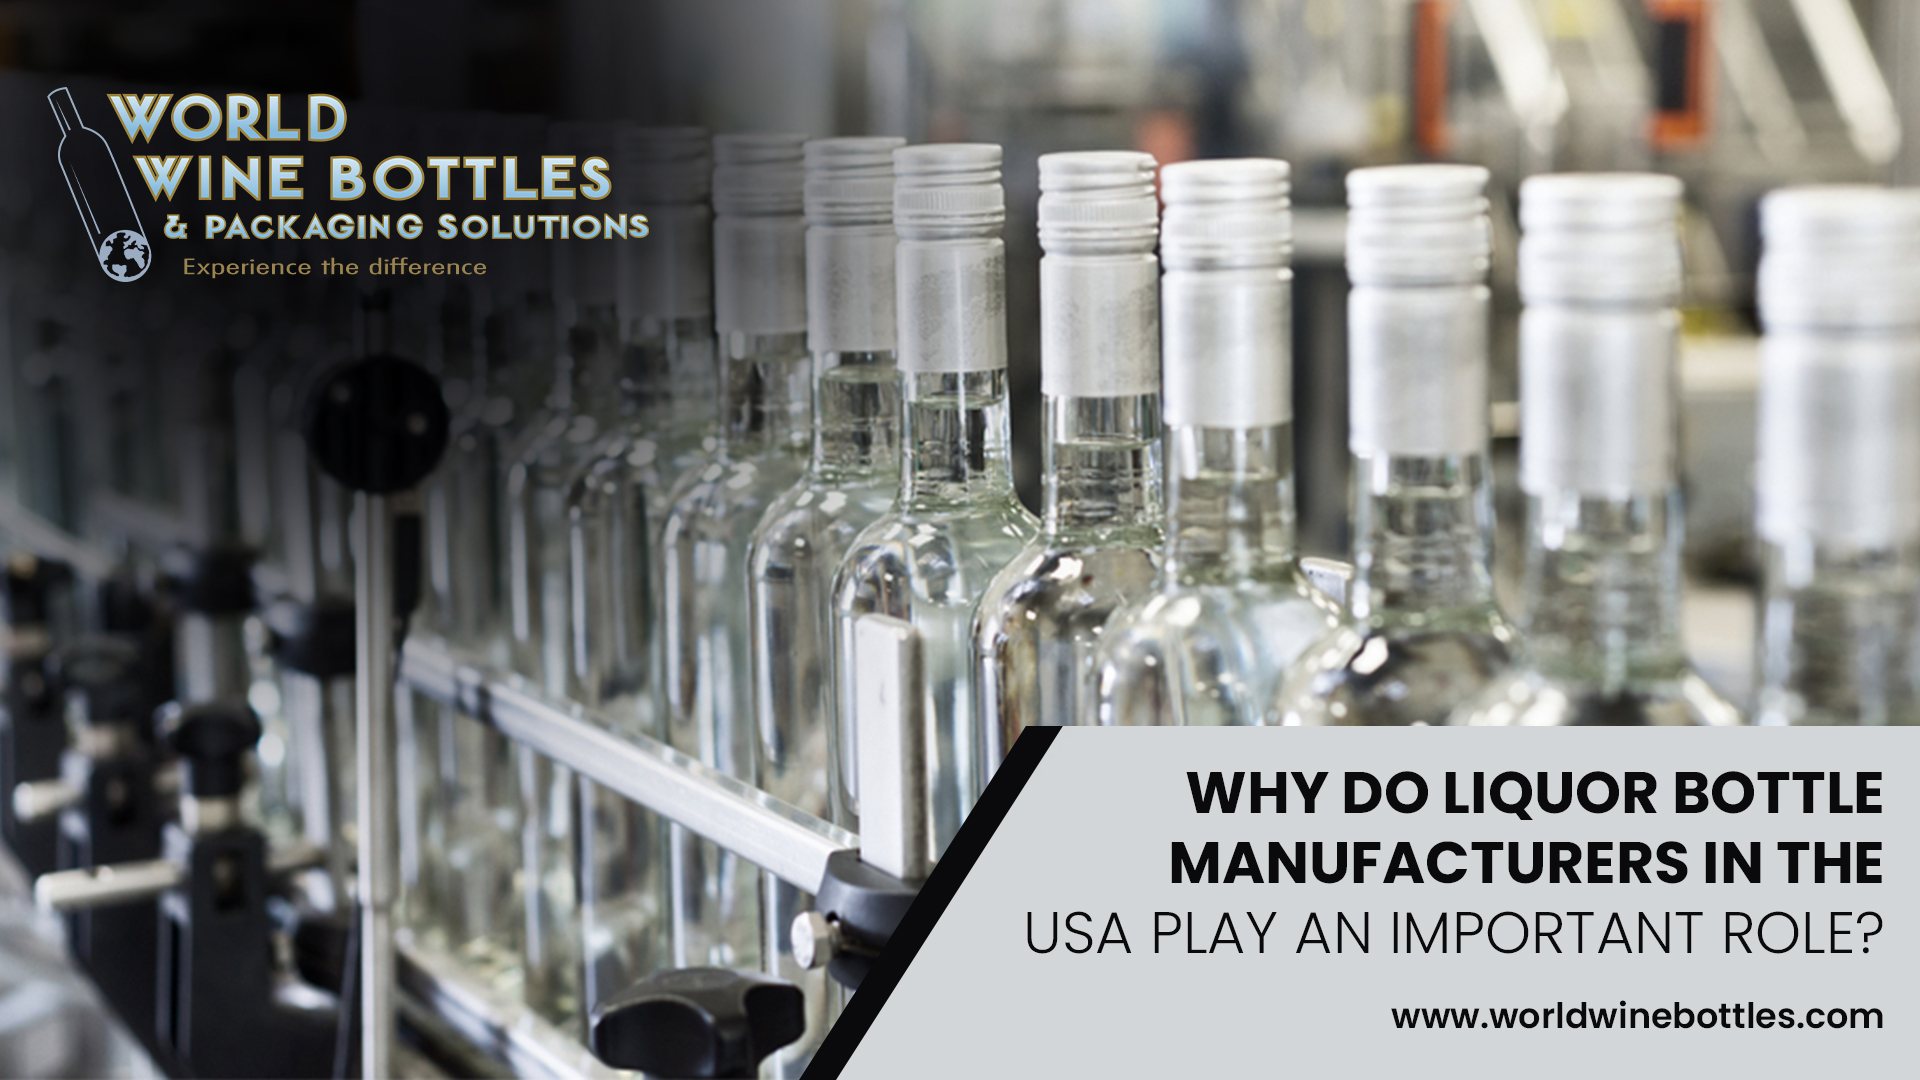 Why Do Liquor Bottle Manufacturers in the USA Play an Important Role?